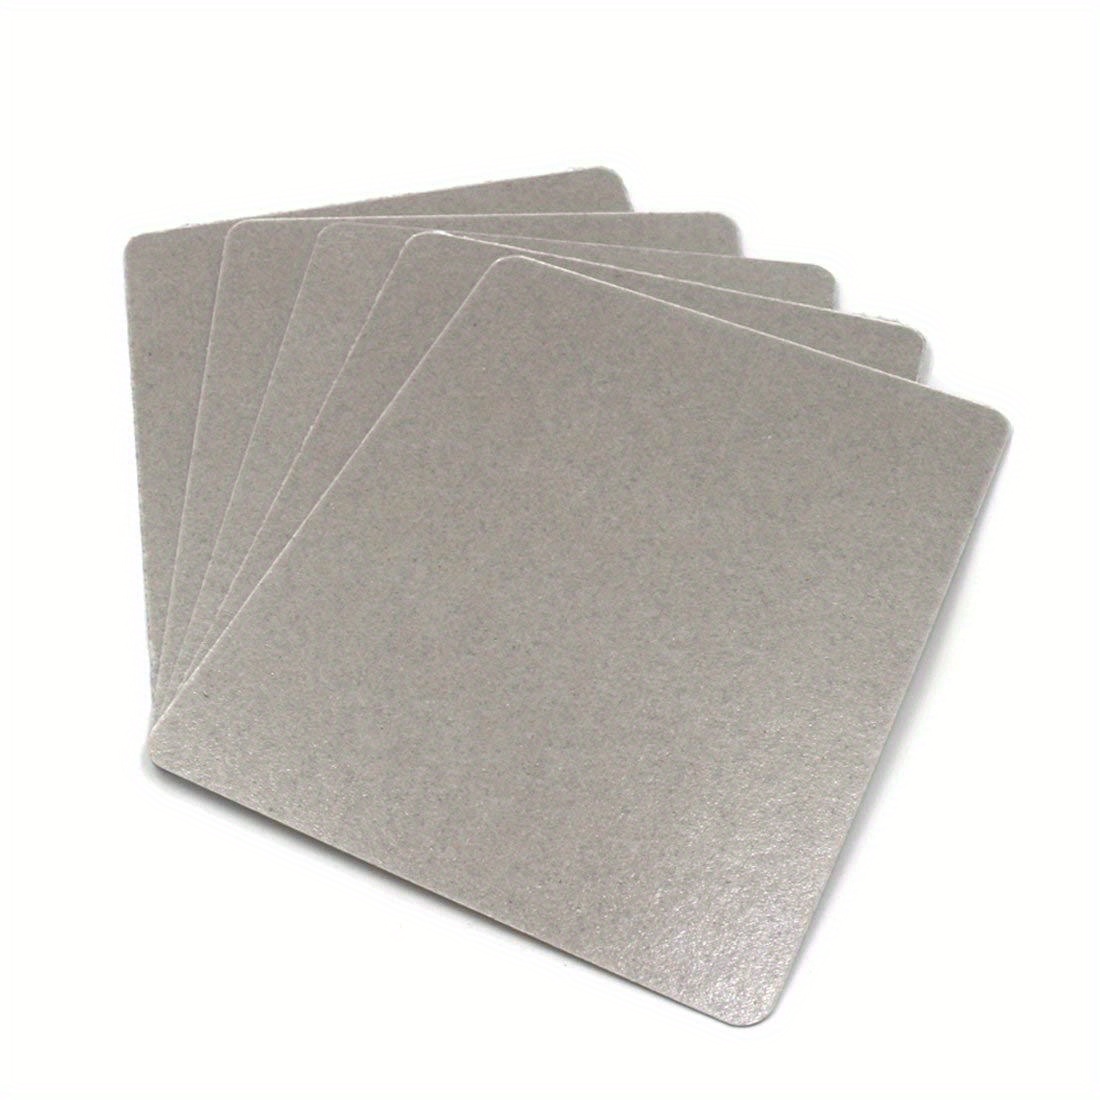 5pcs Waveguide Cover, Universal Mica Sheet For All Microwave Oven, Cut To  Size, 150x120mm